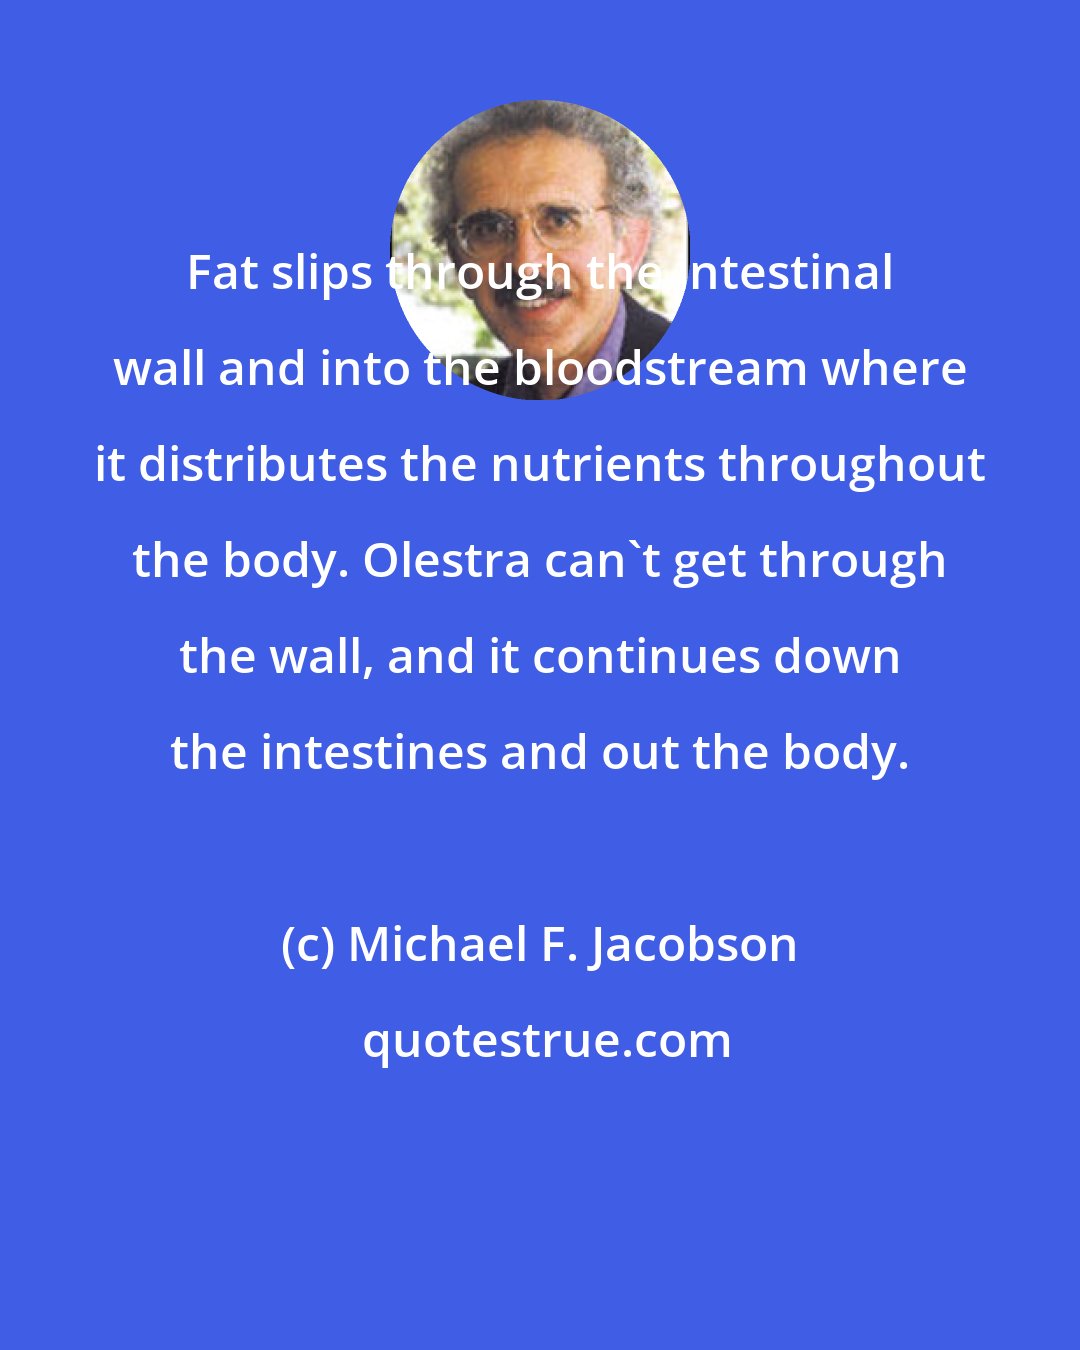 Michael F. Jacobson: Fat slips through the intestinal wall and into the bloodstream where it distributes the nutrients throughout the body. Olestra can't get through the wall, and it continues down the intestines and out the body.